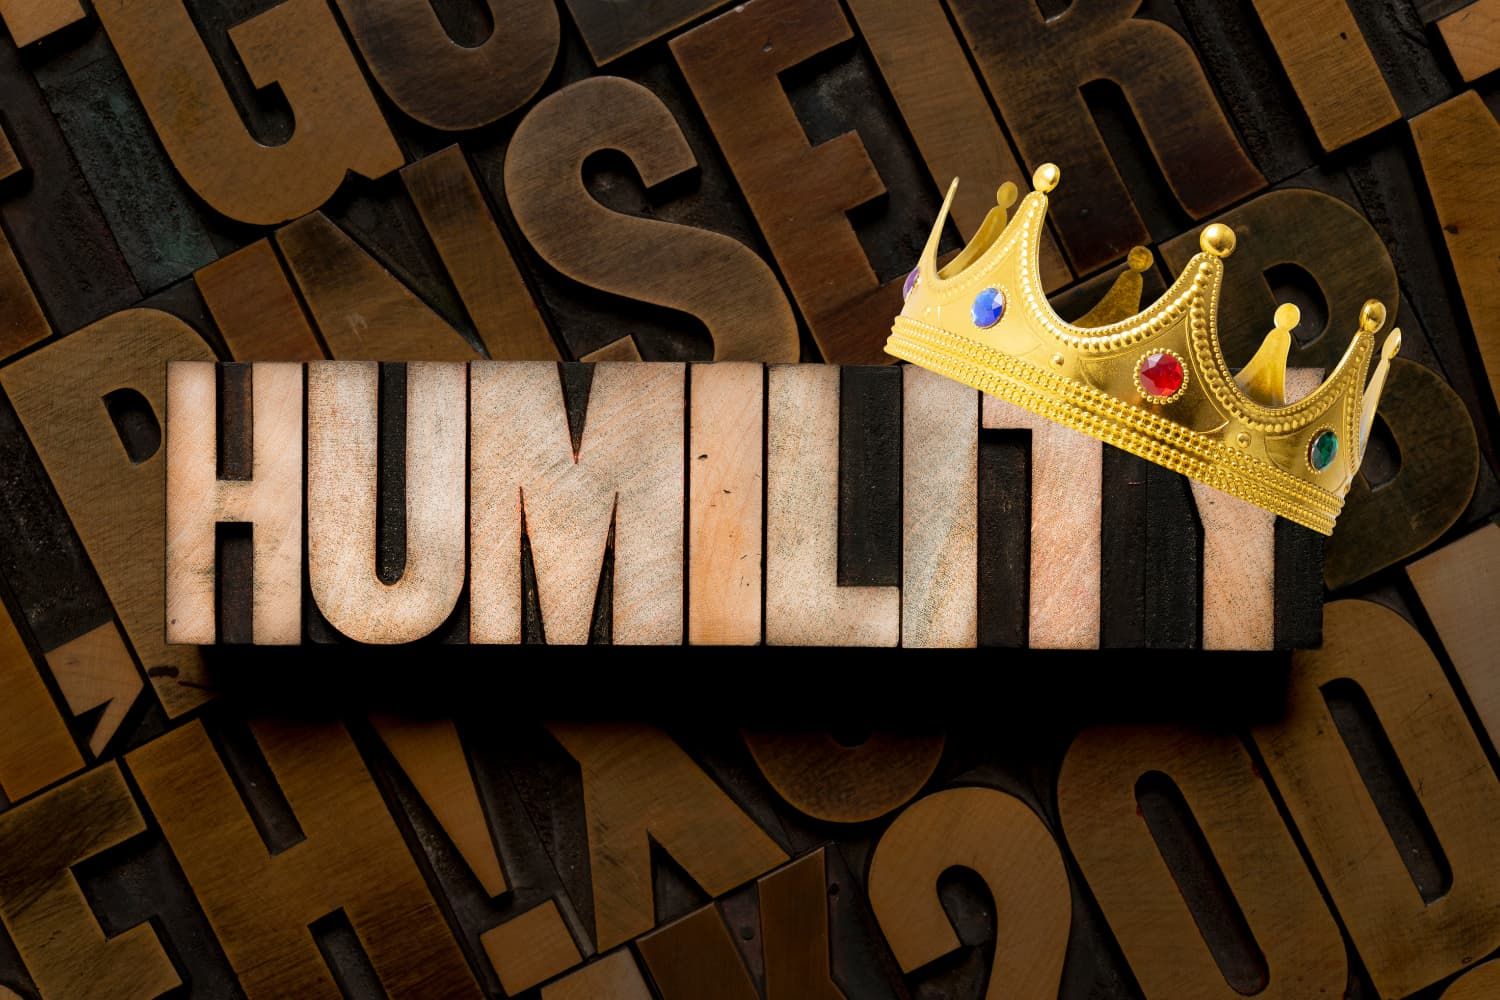 Prayer%20-%20NT%20Philippians%20-%20Crowns%20of%20humility-b83f3a0b Family of God